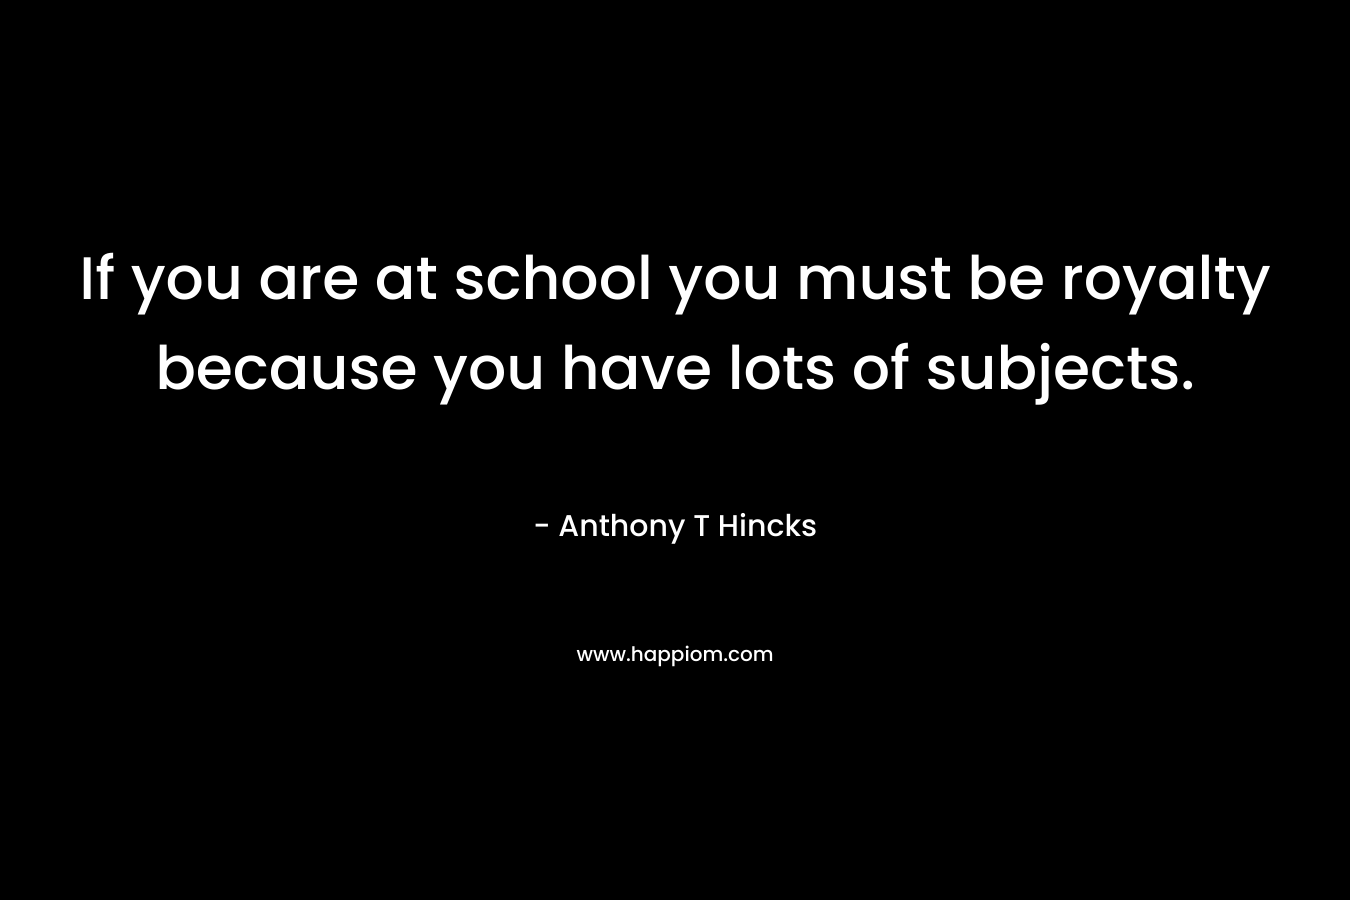 If you are at school you must be royalty because you have lots of subjects. – Anthony T Hincks